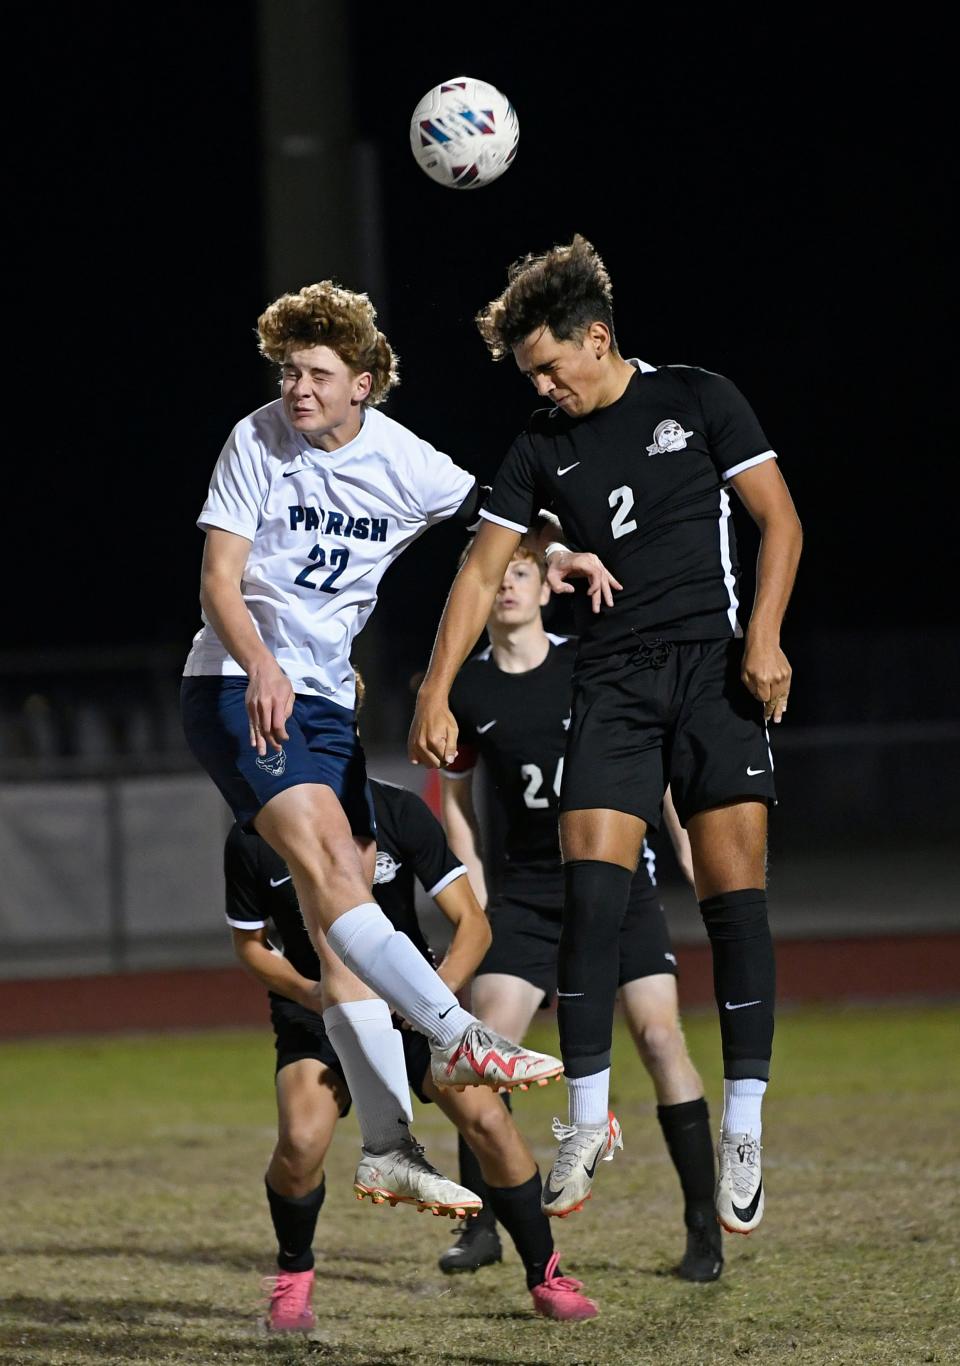 Parish's Ryder Spisak (#22) goes almost head to head with Braden River's Brunno Reus (#2) during the game. The Parish Bulls won the Class 5A-District 10 final Thursday night 1-0 over the hosting Braden River Pirates.